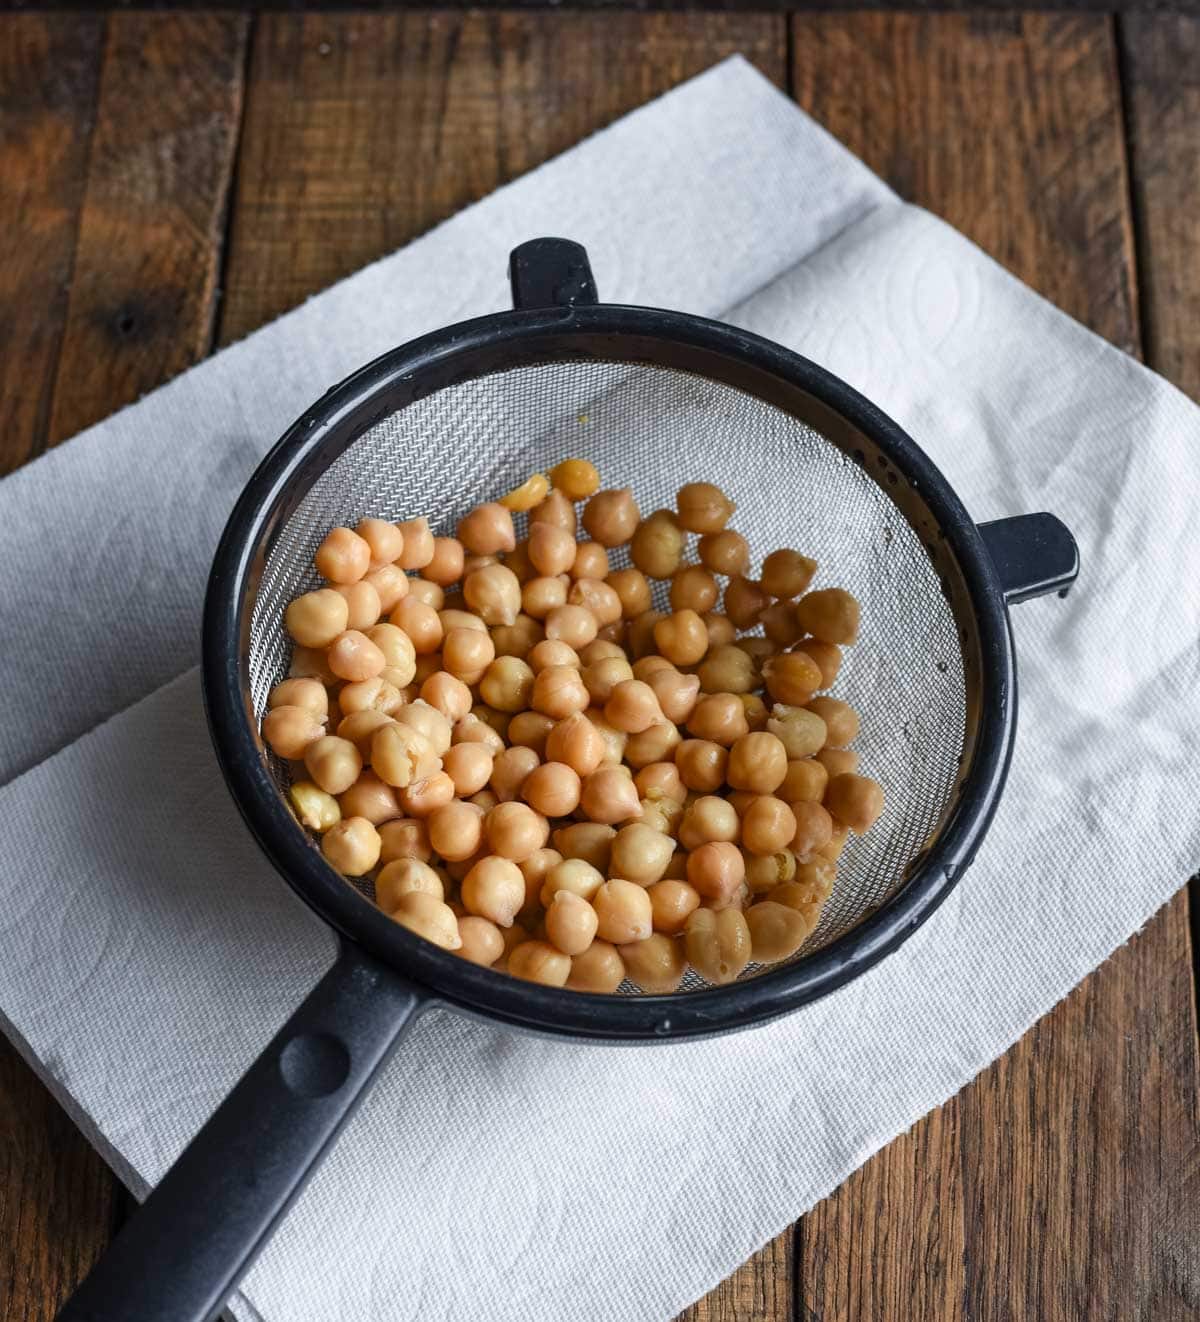 These spicy roasted chickpeas are a tasty and satisfying savory high protein snack with over 6 grams of protein in each delicious serving. 